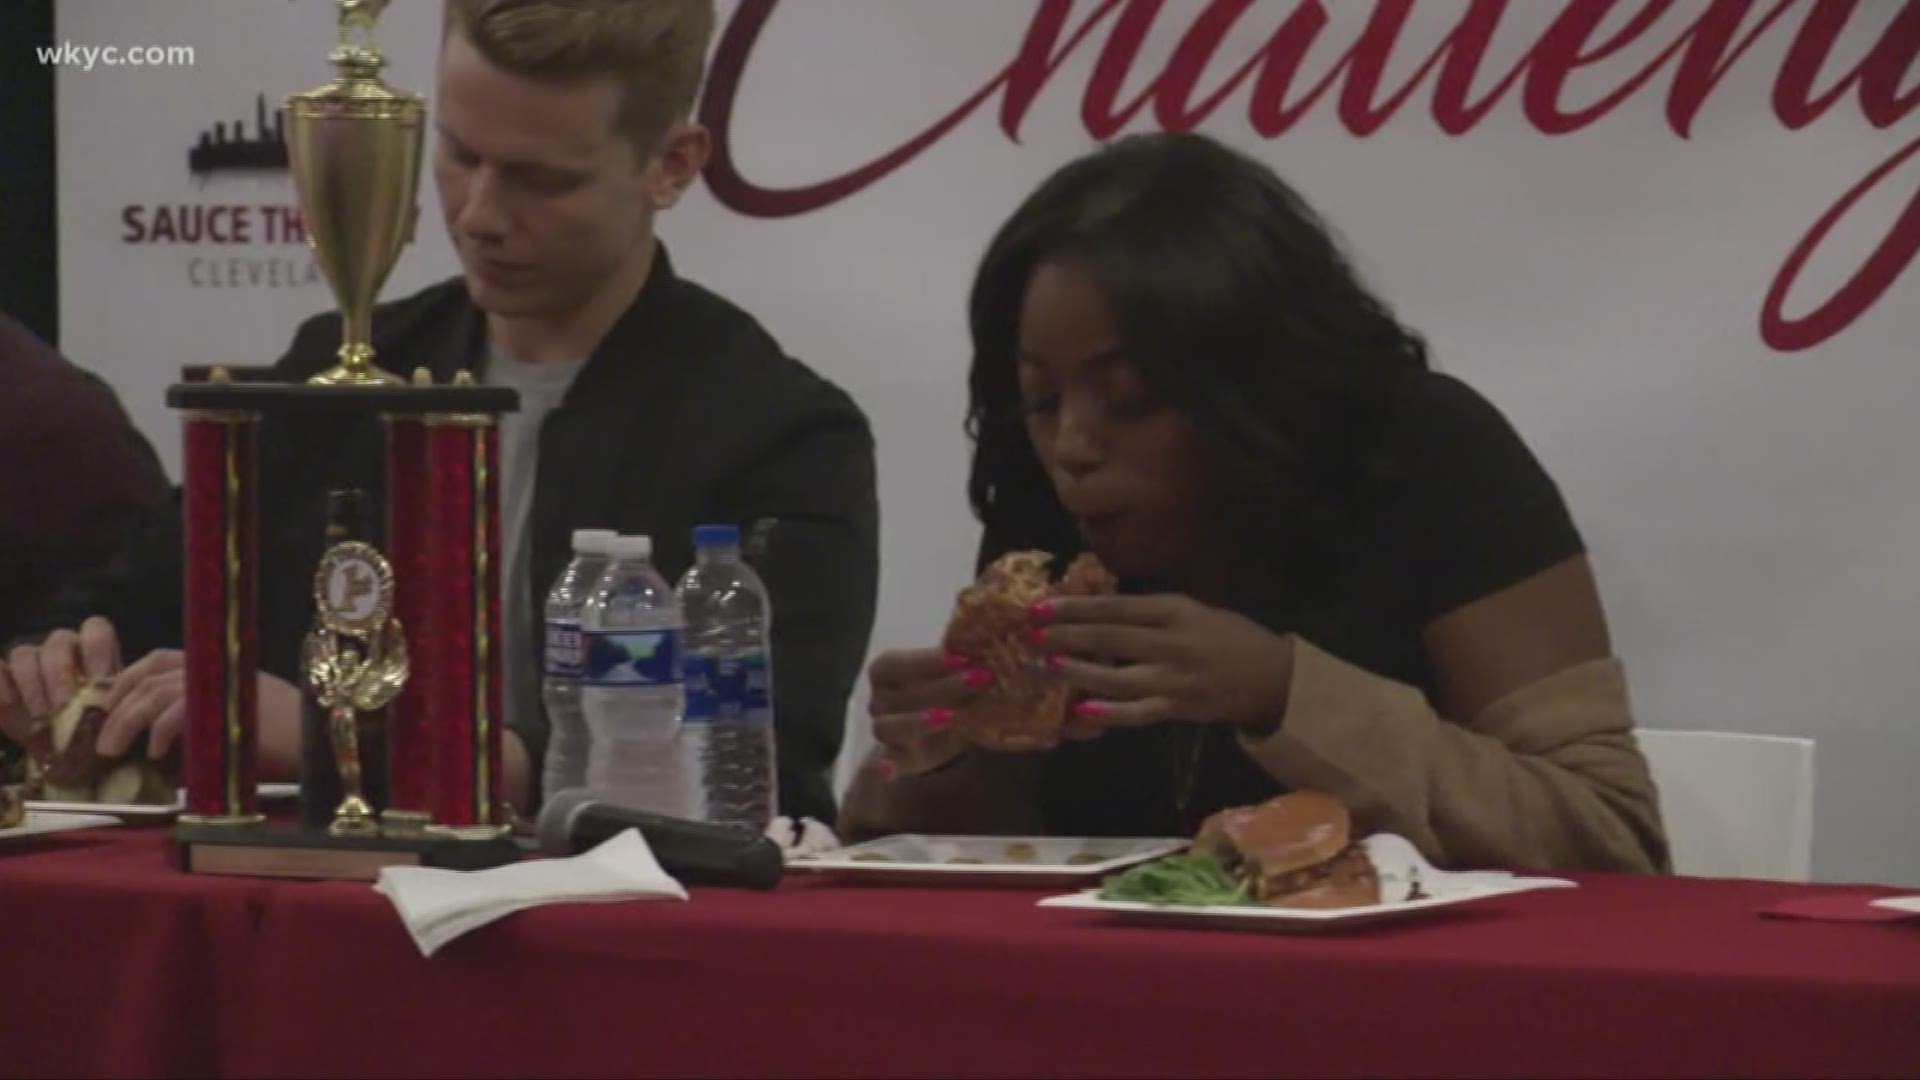 Sauce the City wins Cleveland's Inaugural  Chicken Sandwich  Challenge